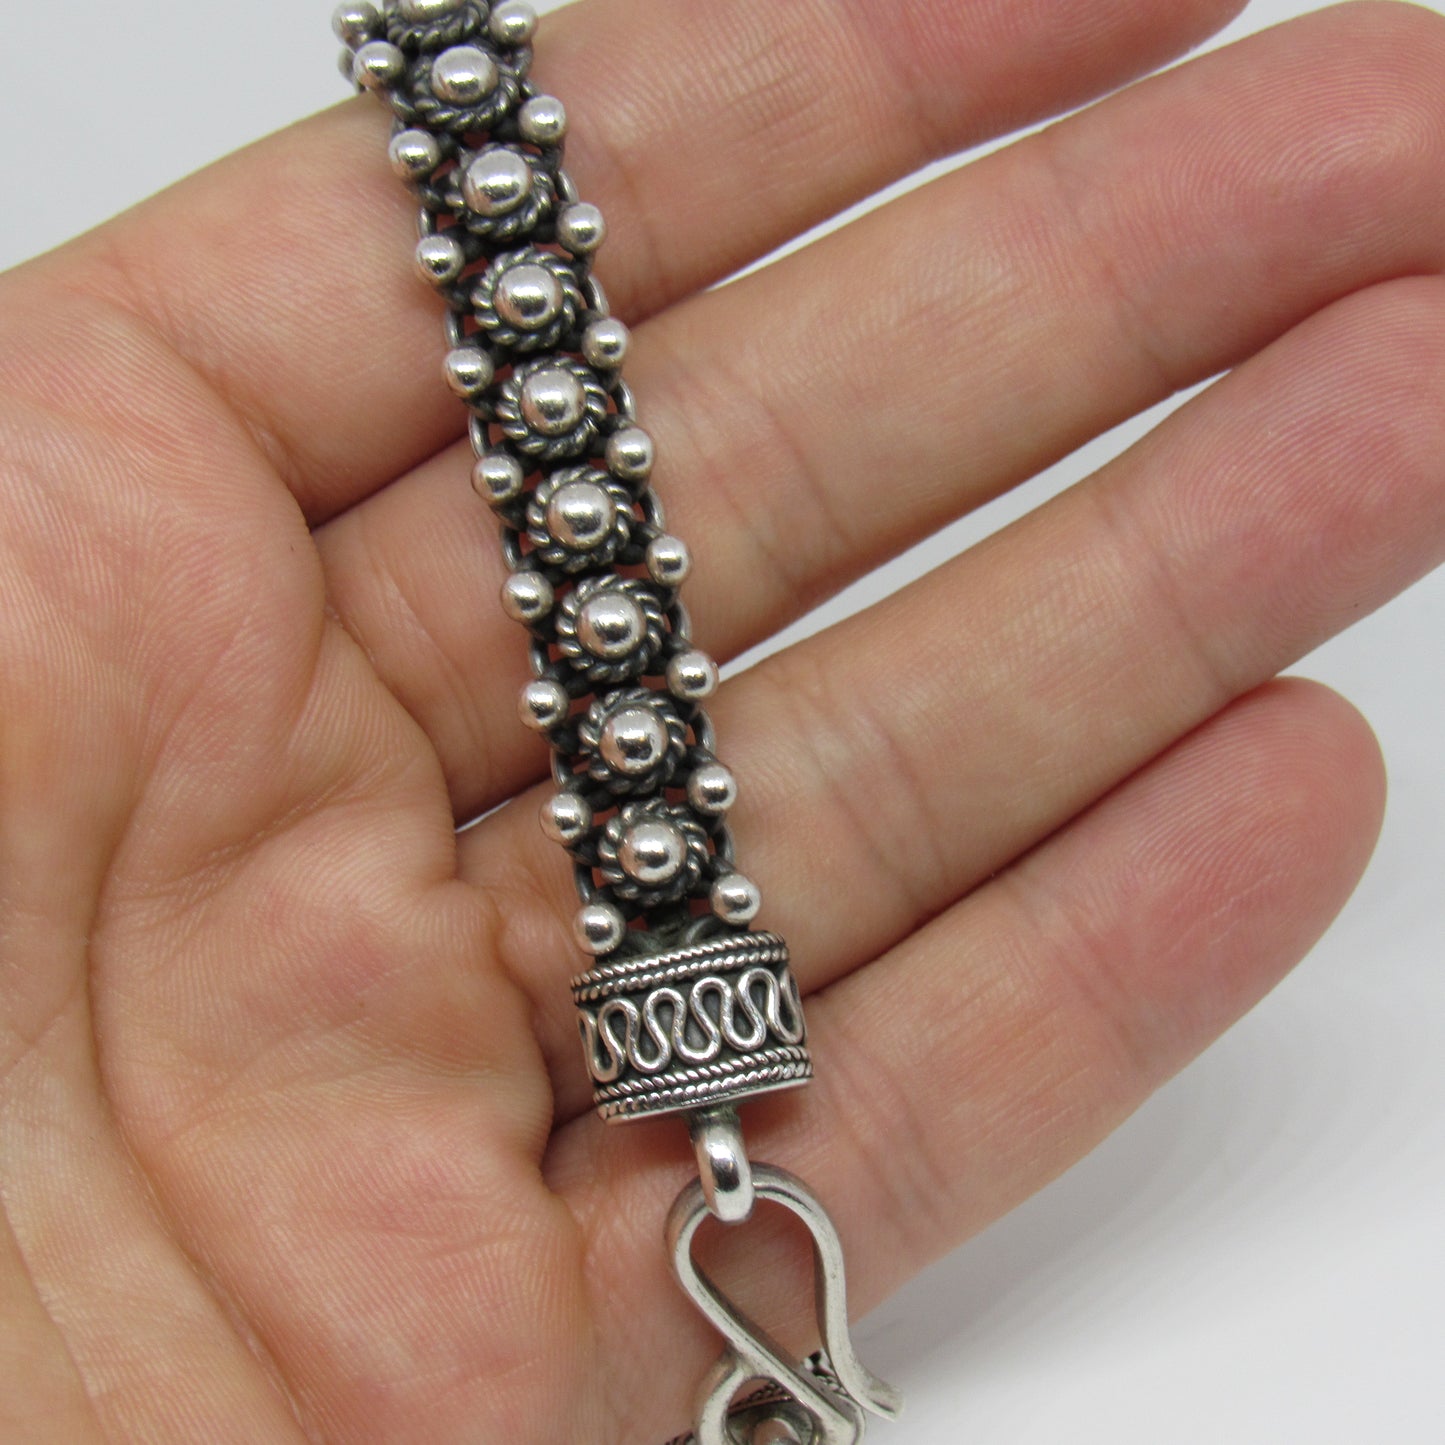 Designer BA Suarti 925 Sterling Silver Balinese Style Ball Link Chain Bracelet - 8 inch